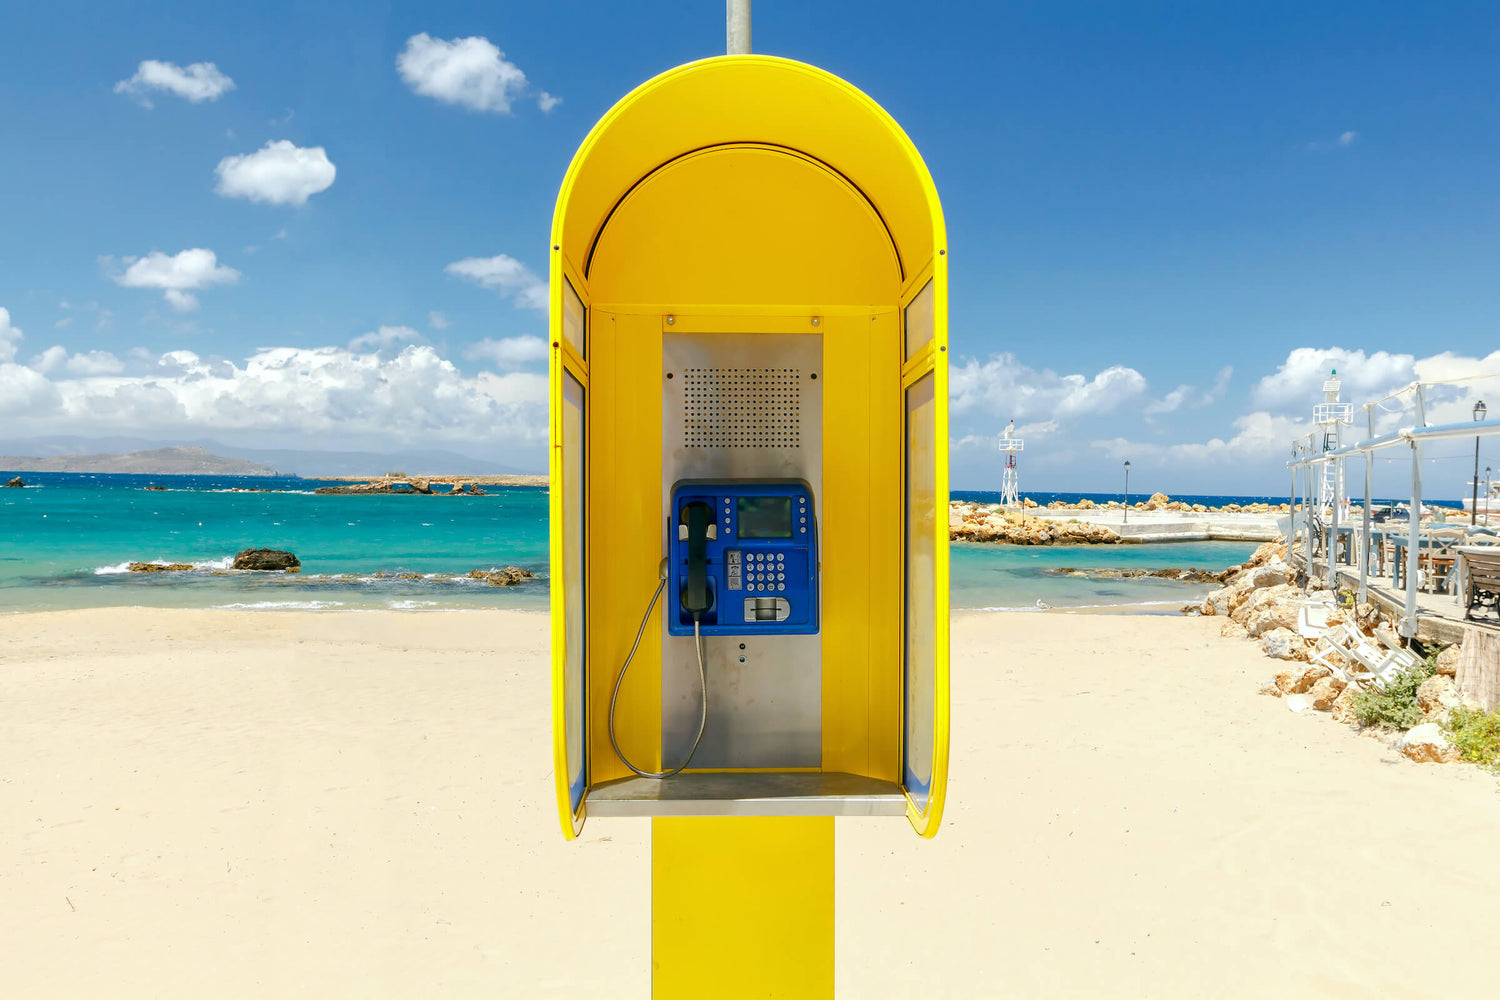 Scenic beach contact us banner featuring a phone booth – reach out to AQTIVAQUA for exceptional swim gear and support